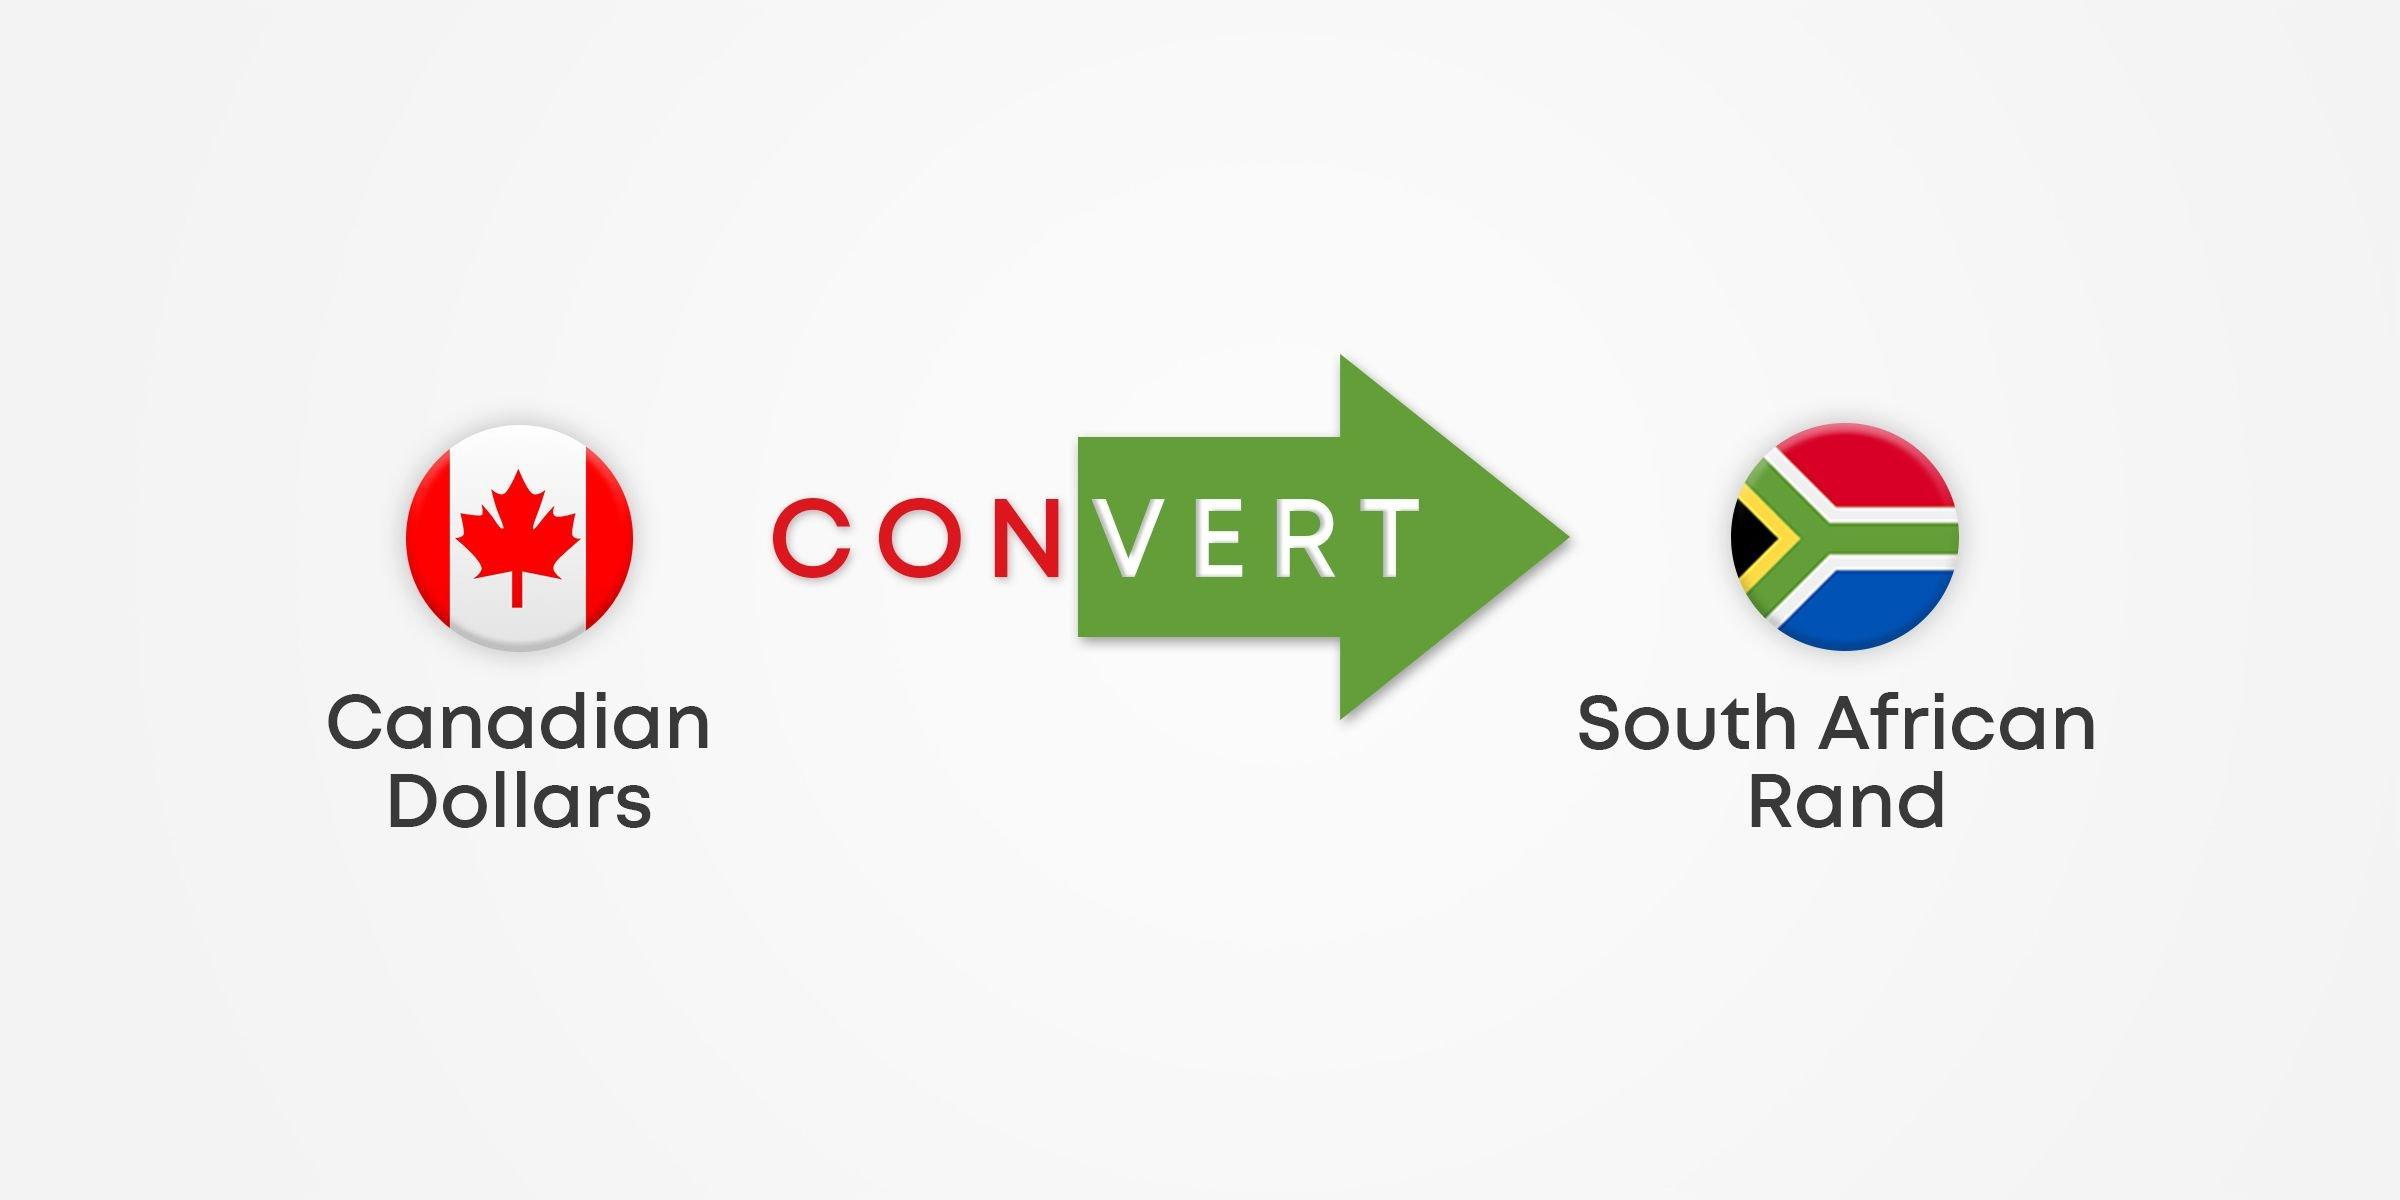 How to Convert your Canadian Dollars to South African Rand?